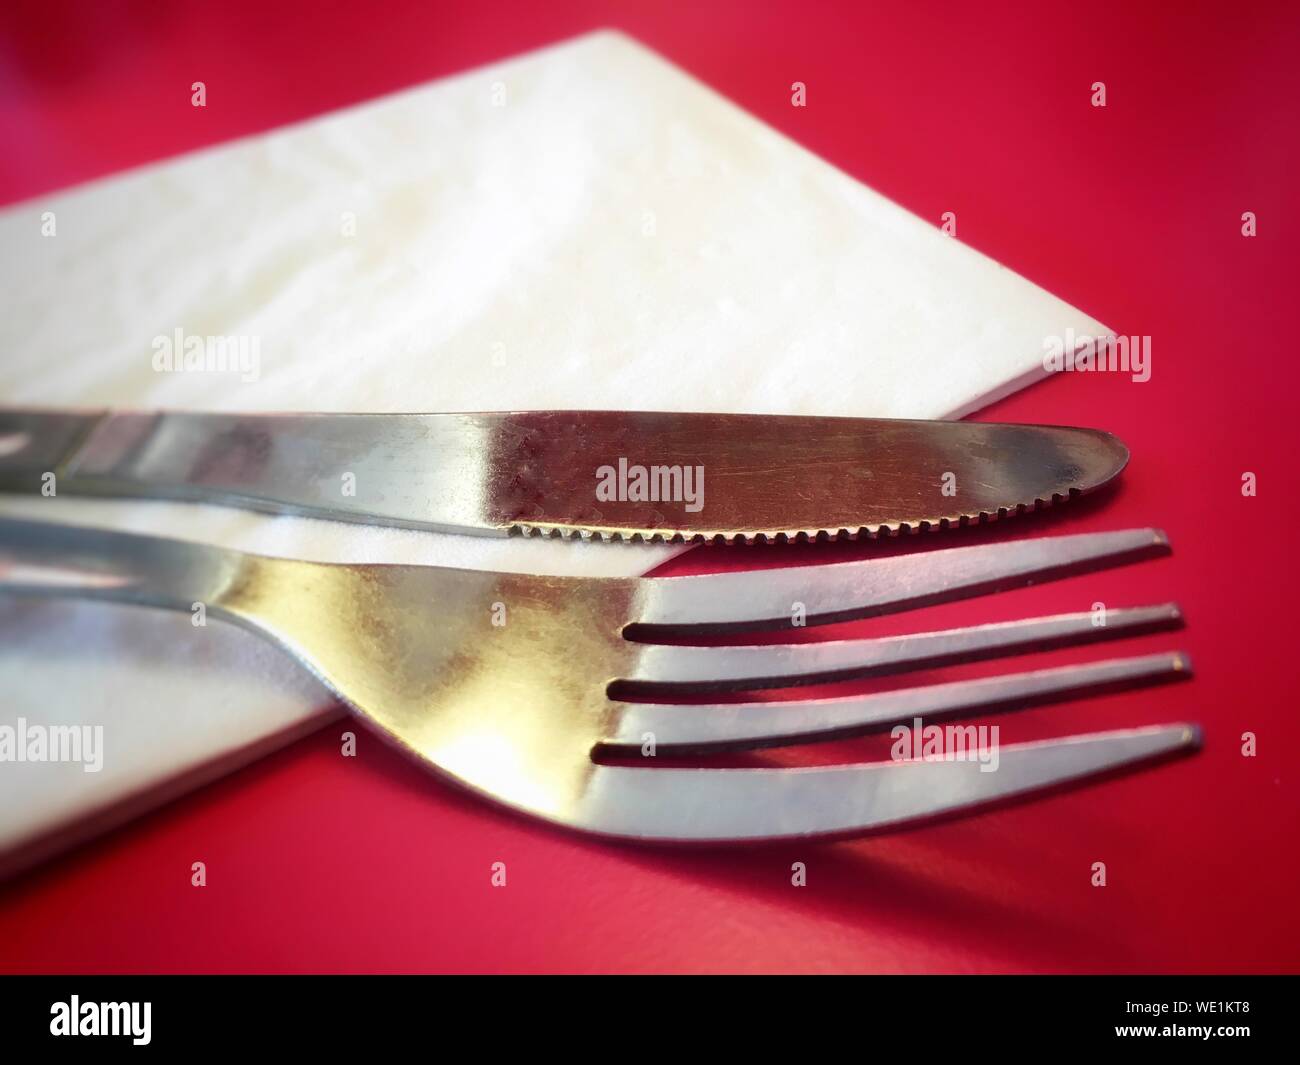 Close-up Of Cutlery With Serviette On Red Table Stock Photo